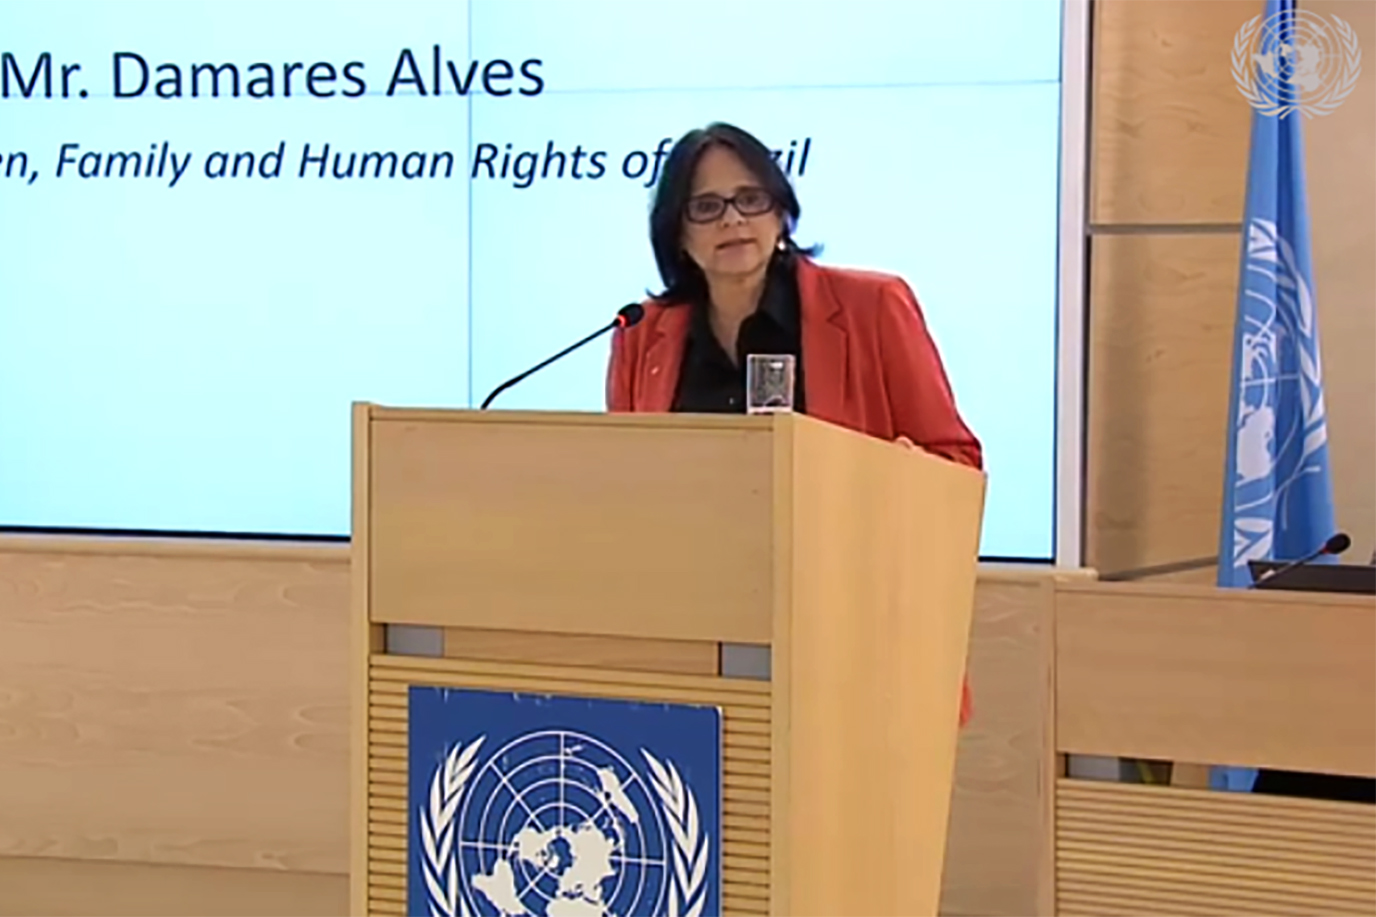 Minister Damares Alves giving a speech from the rostrum of the UN Human Rights Council
